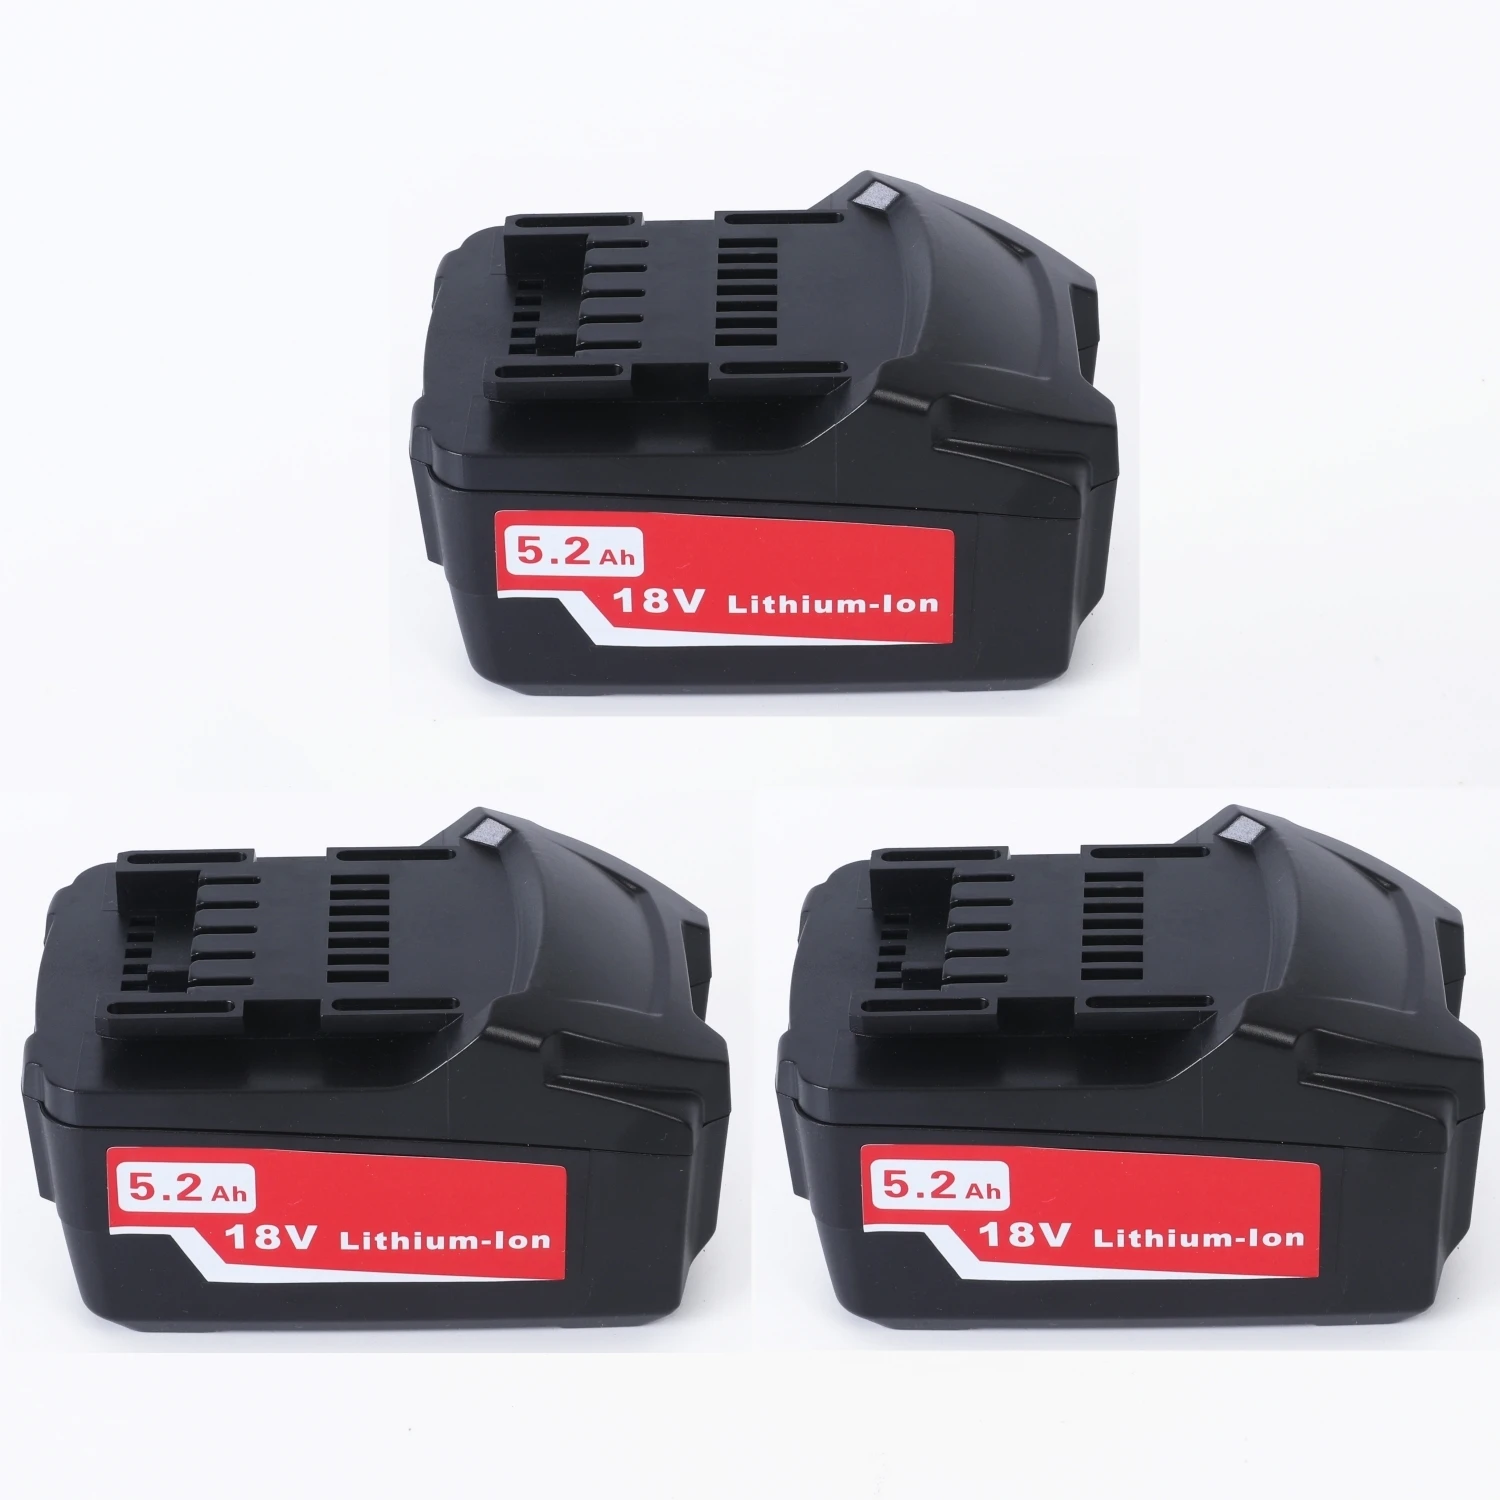 

3 Units 18V 5.2Ah Lithium-Ion Battery for Metabo 18V Cordless Power Tool Drills Drivers for 625592000 625591000